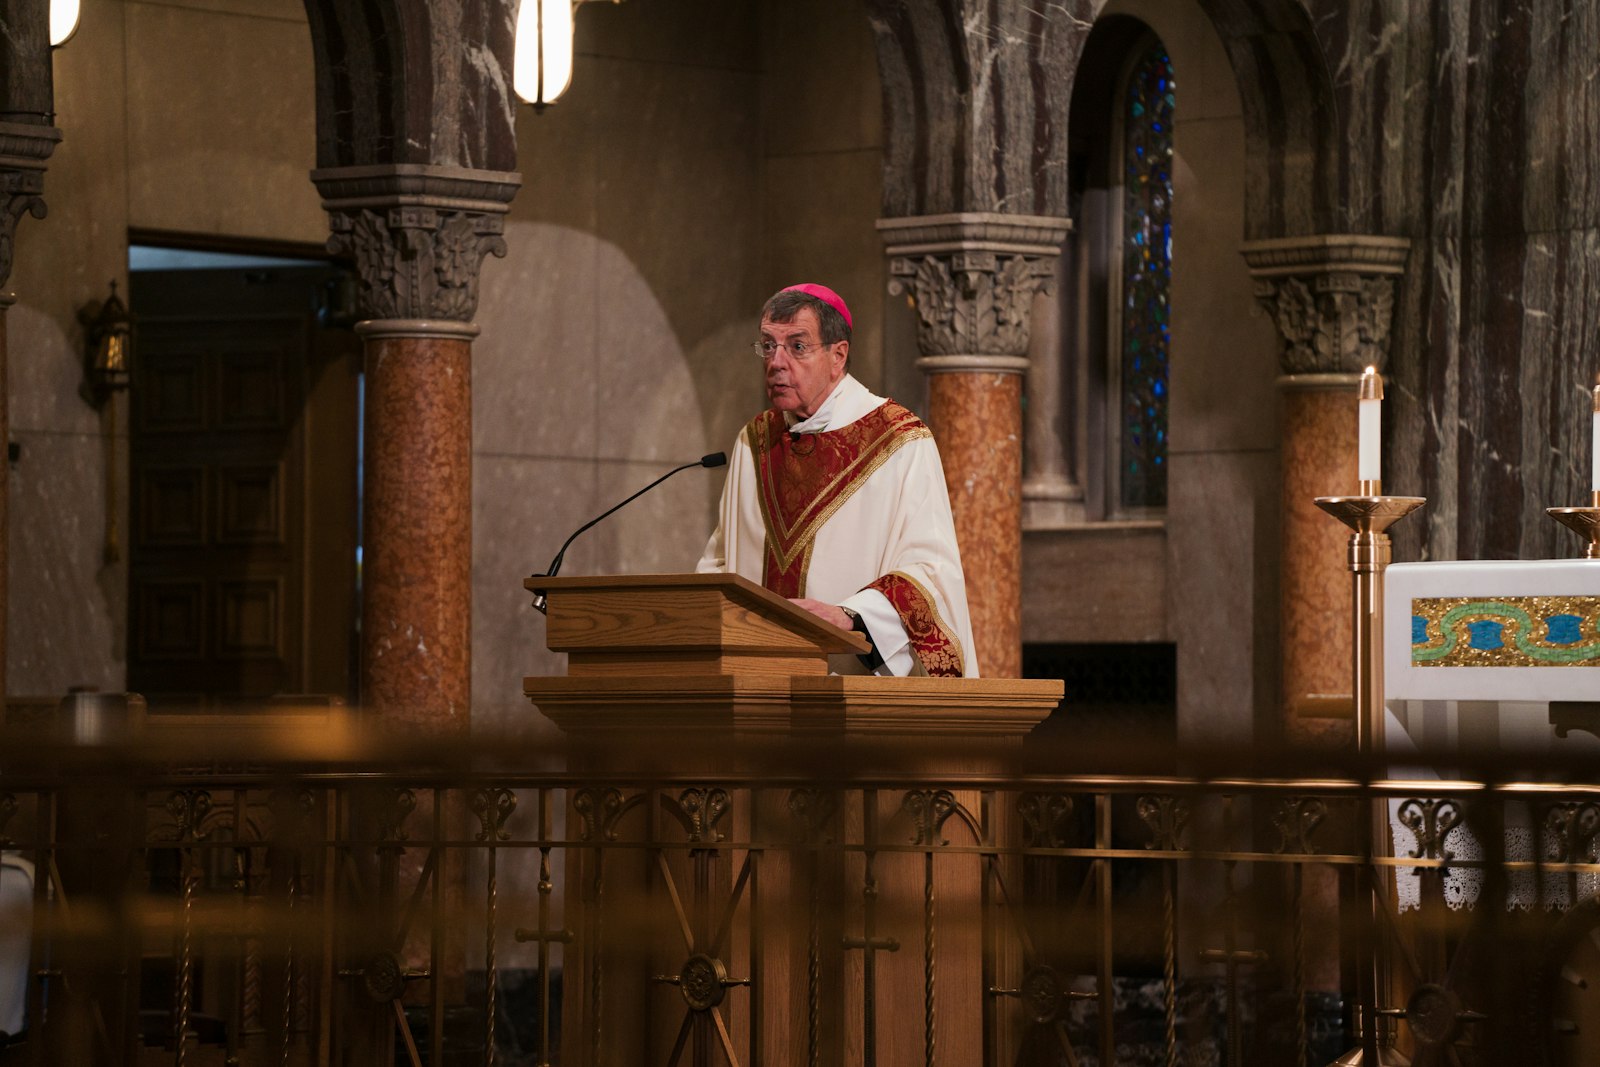 In his homily, reflecting on the first reading, a letter from St. Paul to the Romans (7:18-25), Archbishop Vigneron said that on our own, humankind is destined to sin, but through God, we are saved.